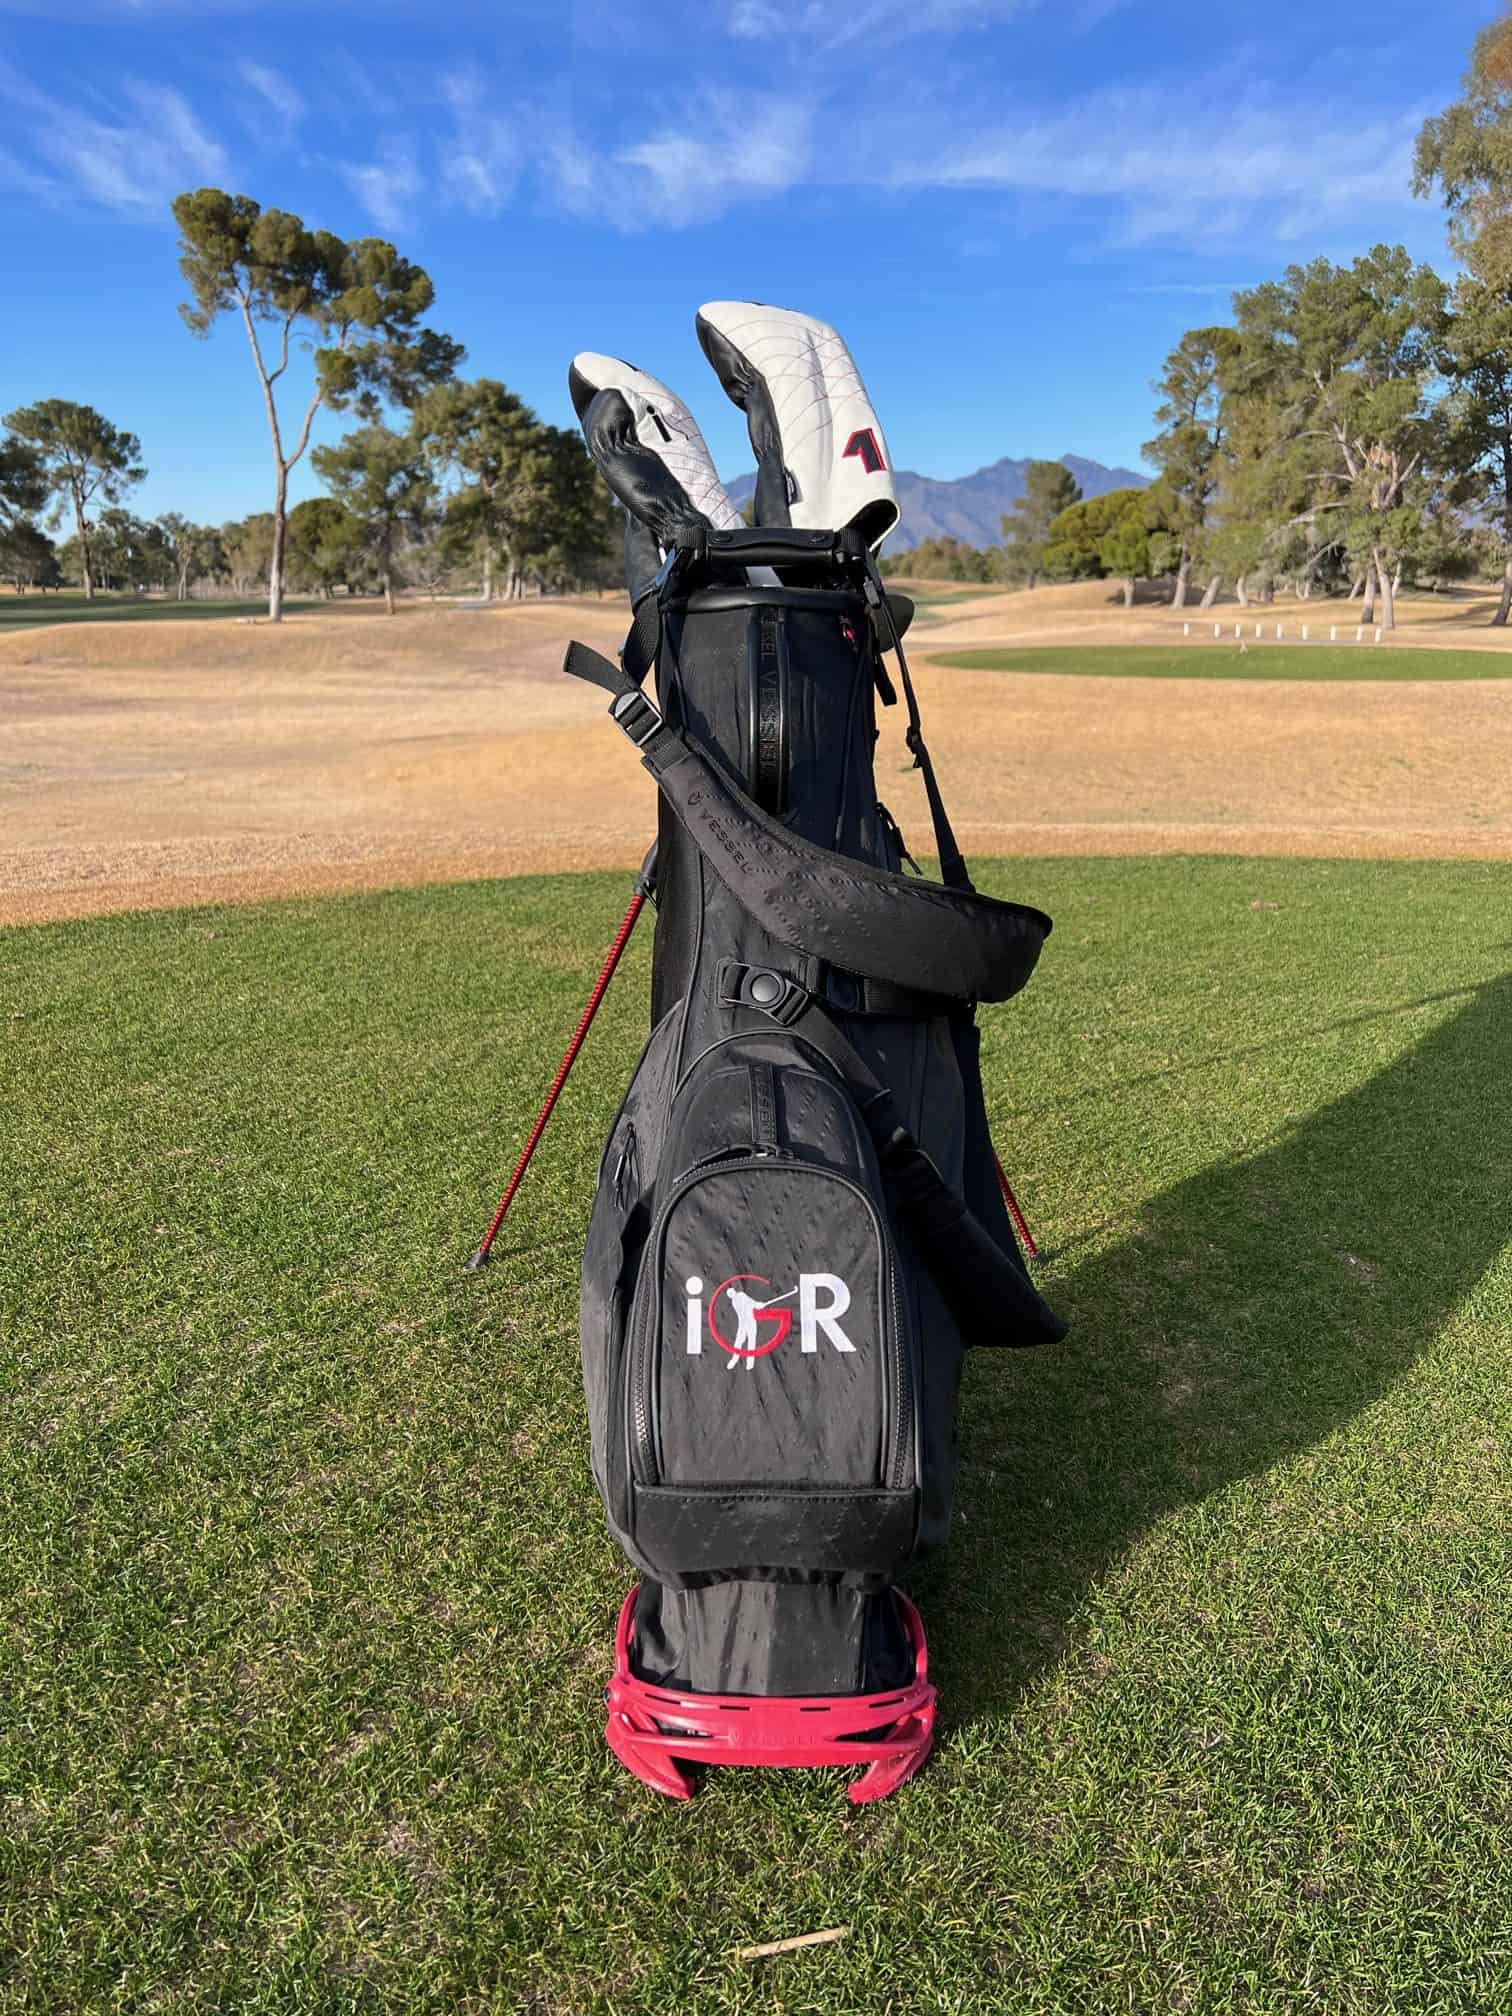 Vessel Player IV Pro Stand Bag Review - Independent Golf Reviews